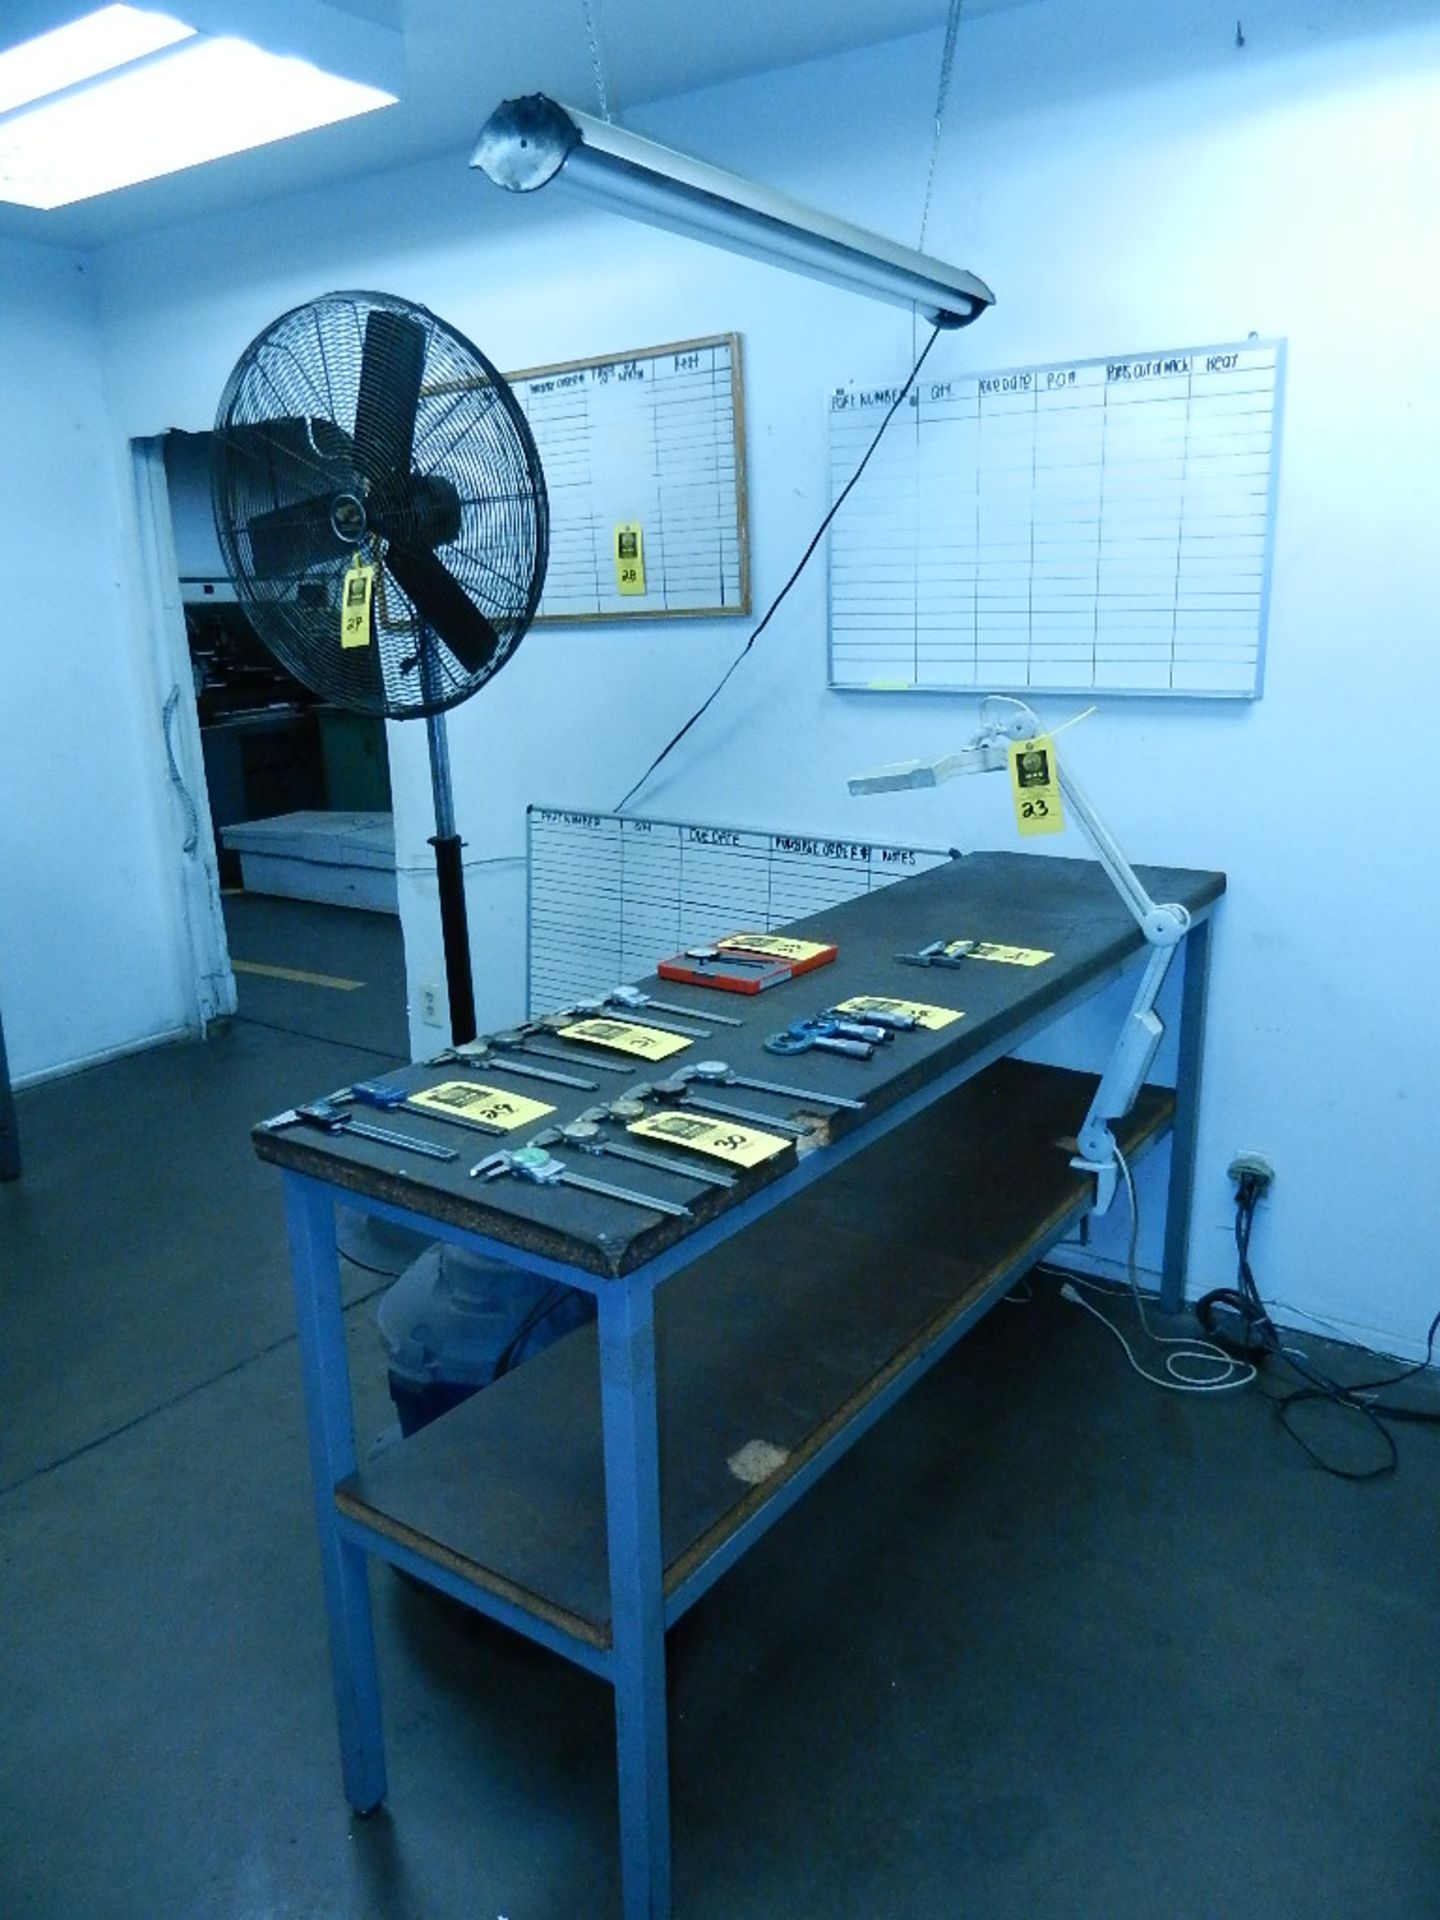 Lot: 2-Tier Metal Frame Work Bench 72"L X 20"W X 36"H, Magnifying Lamp & Overhead Light